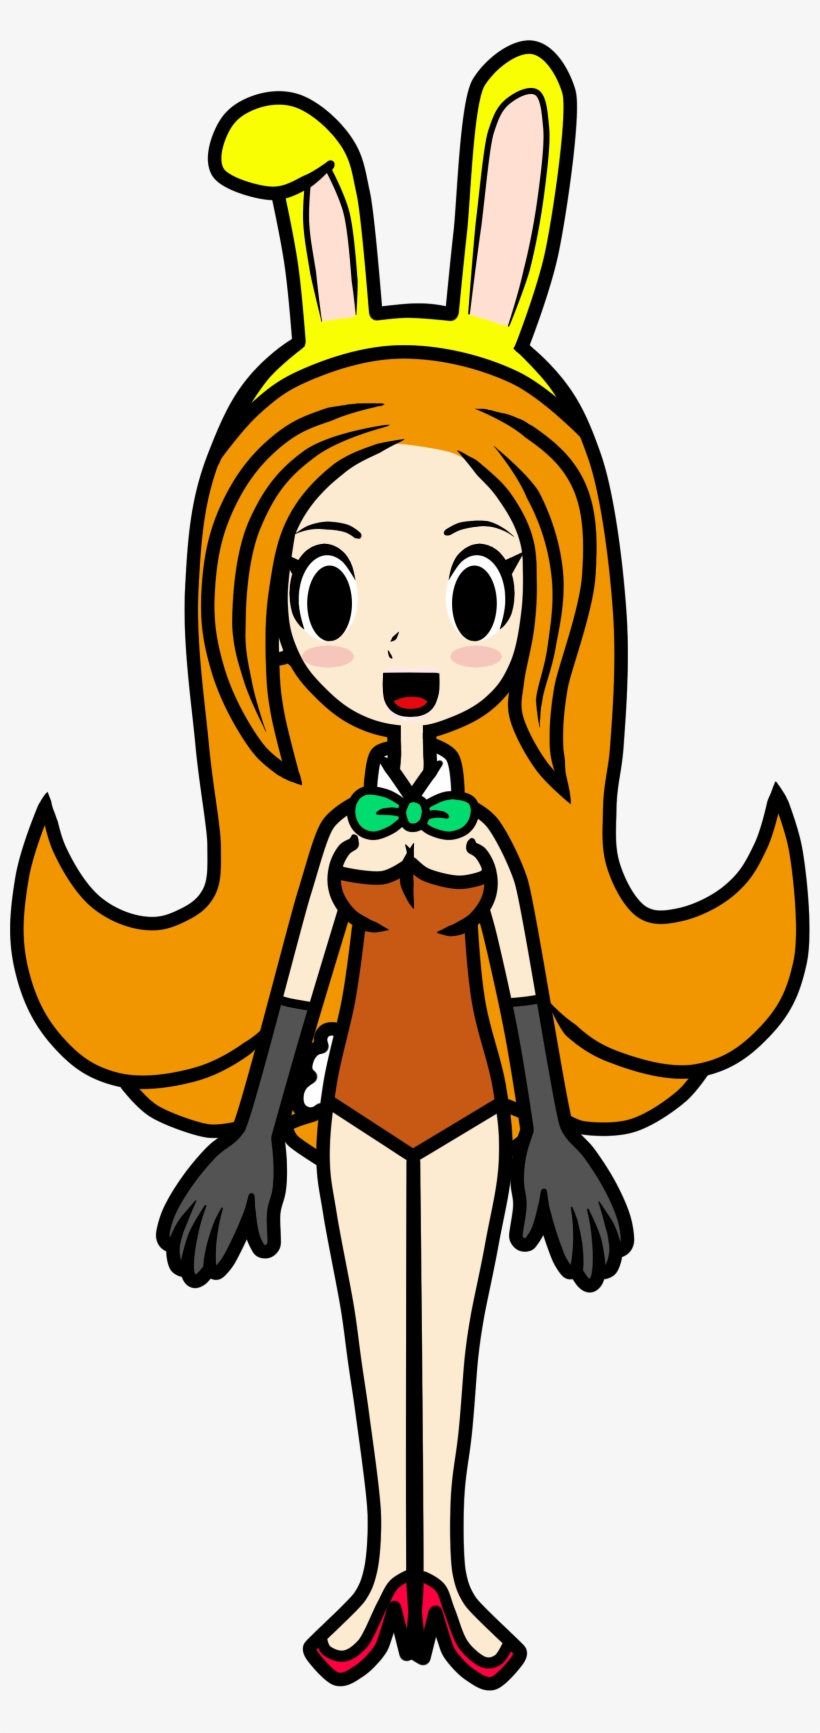 Play Bunny Mona - Portable Network Graphics, transparent png #4075239